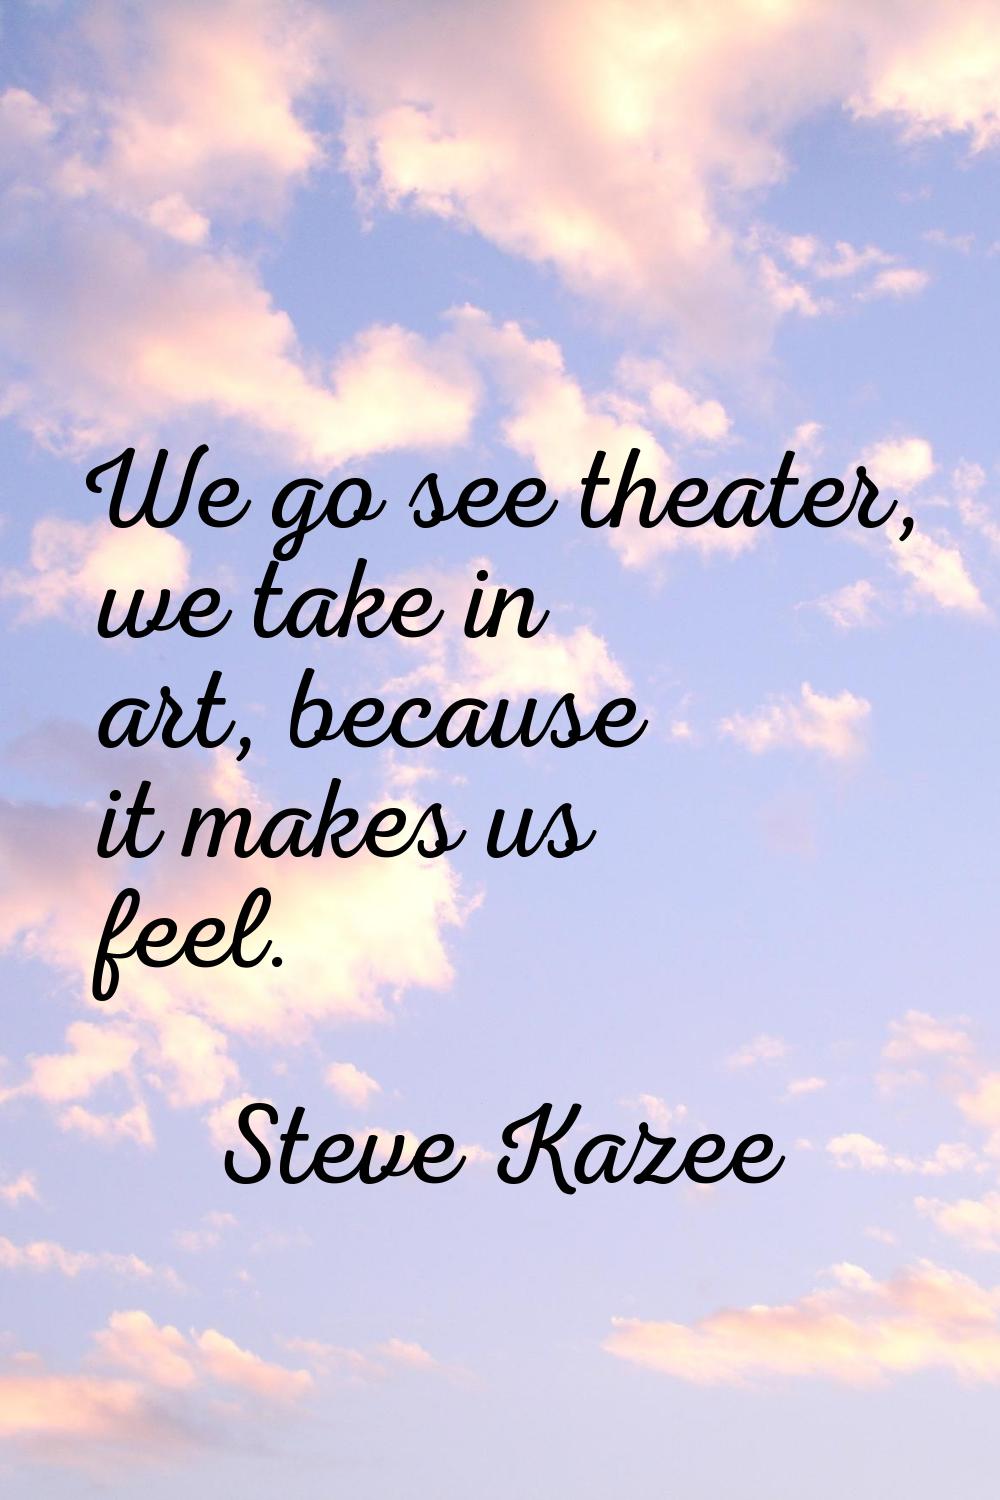 We go see theater, we take in art, because it makes us feel.